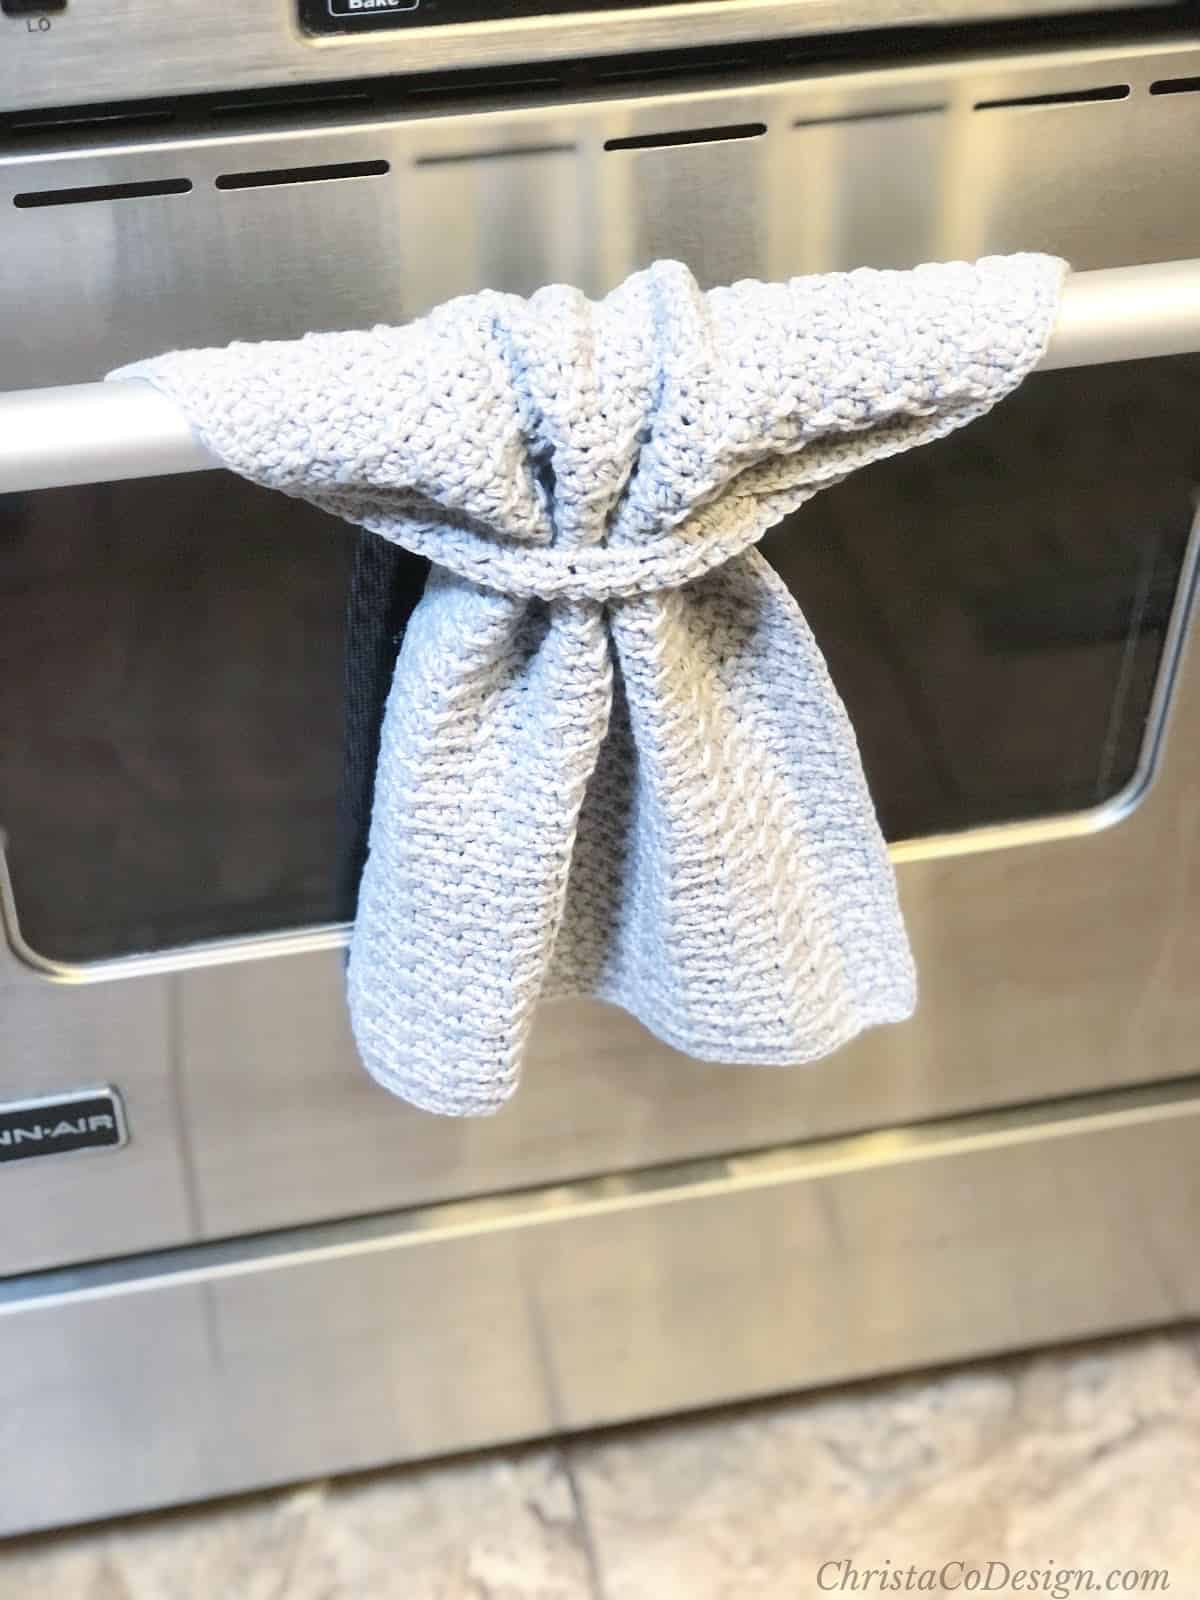 Stainless steel oven with crochet hand towel hanging.